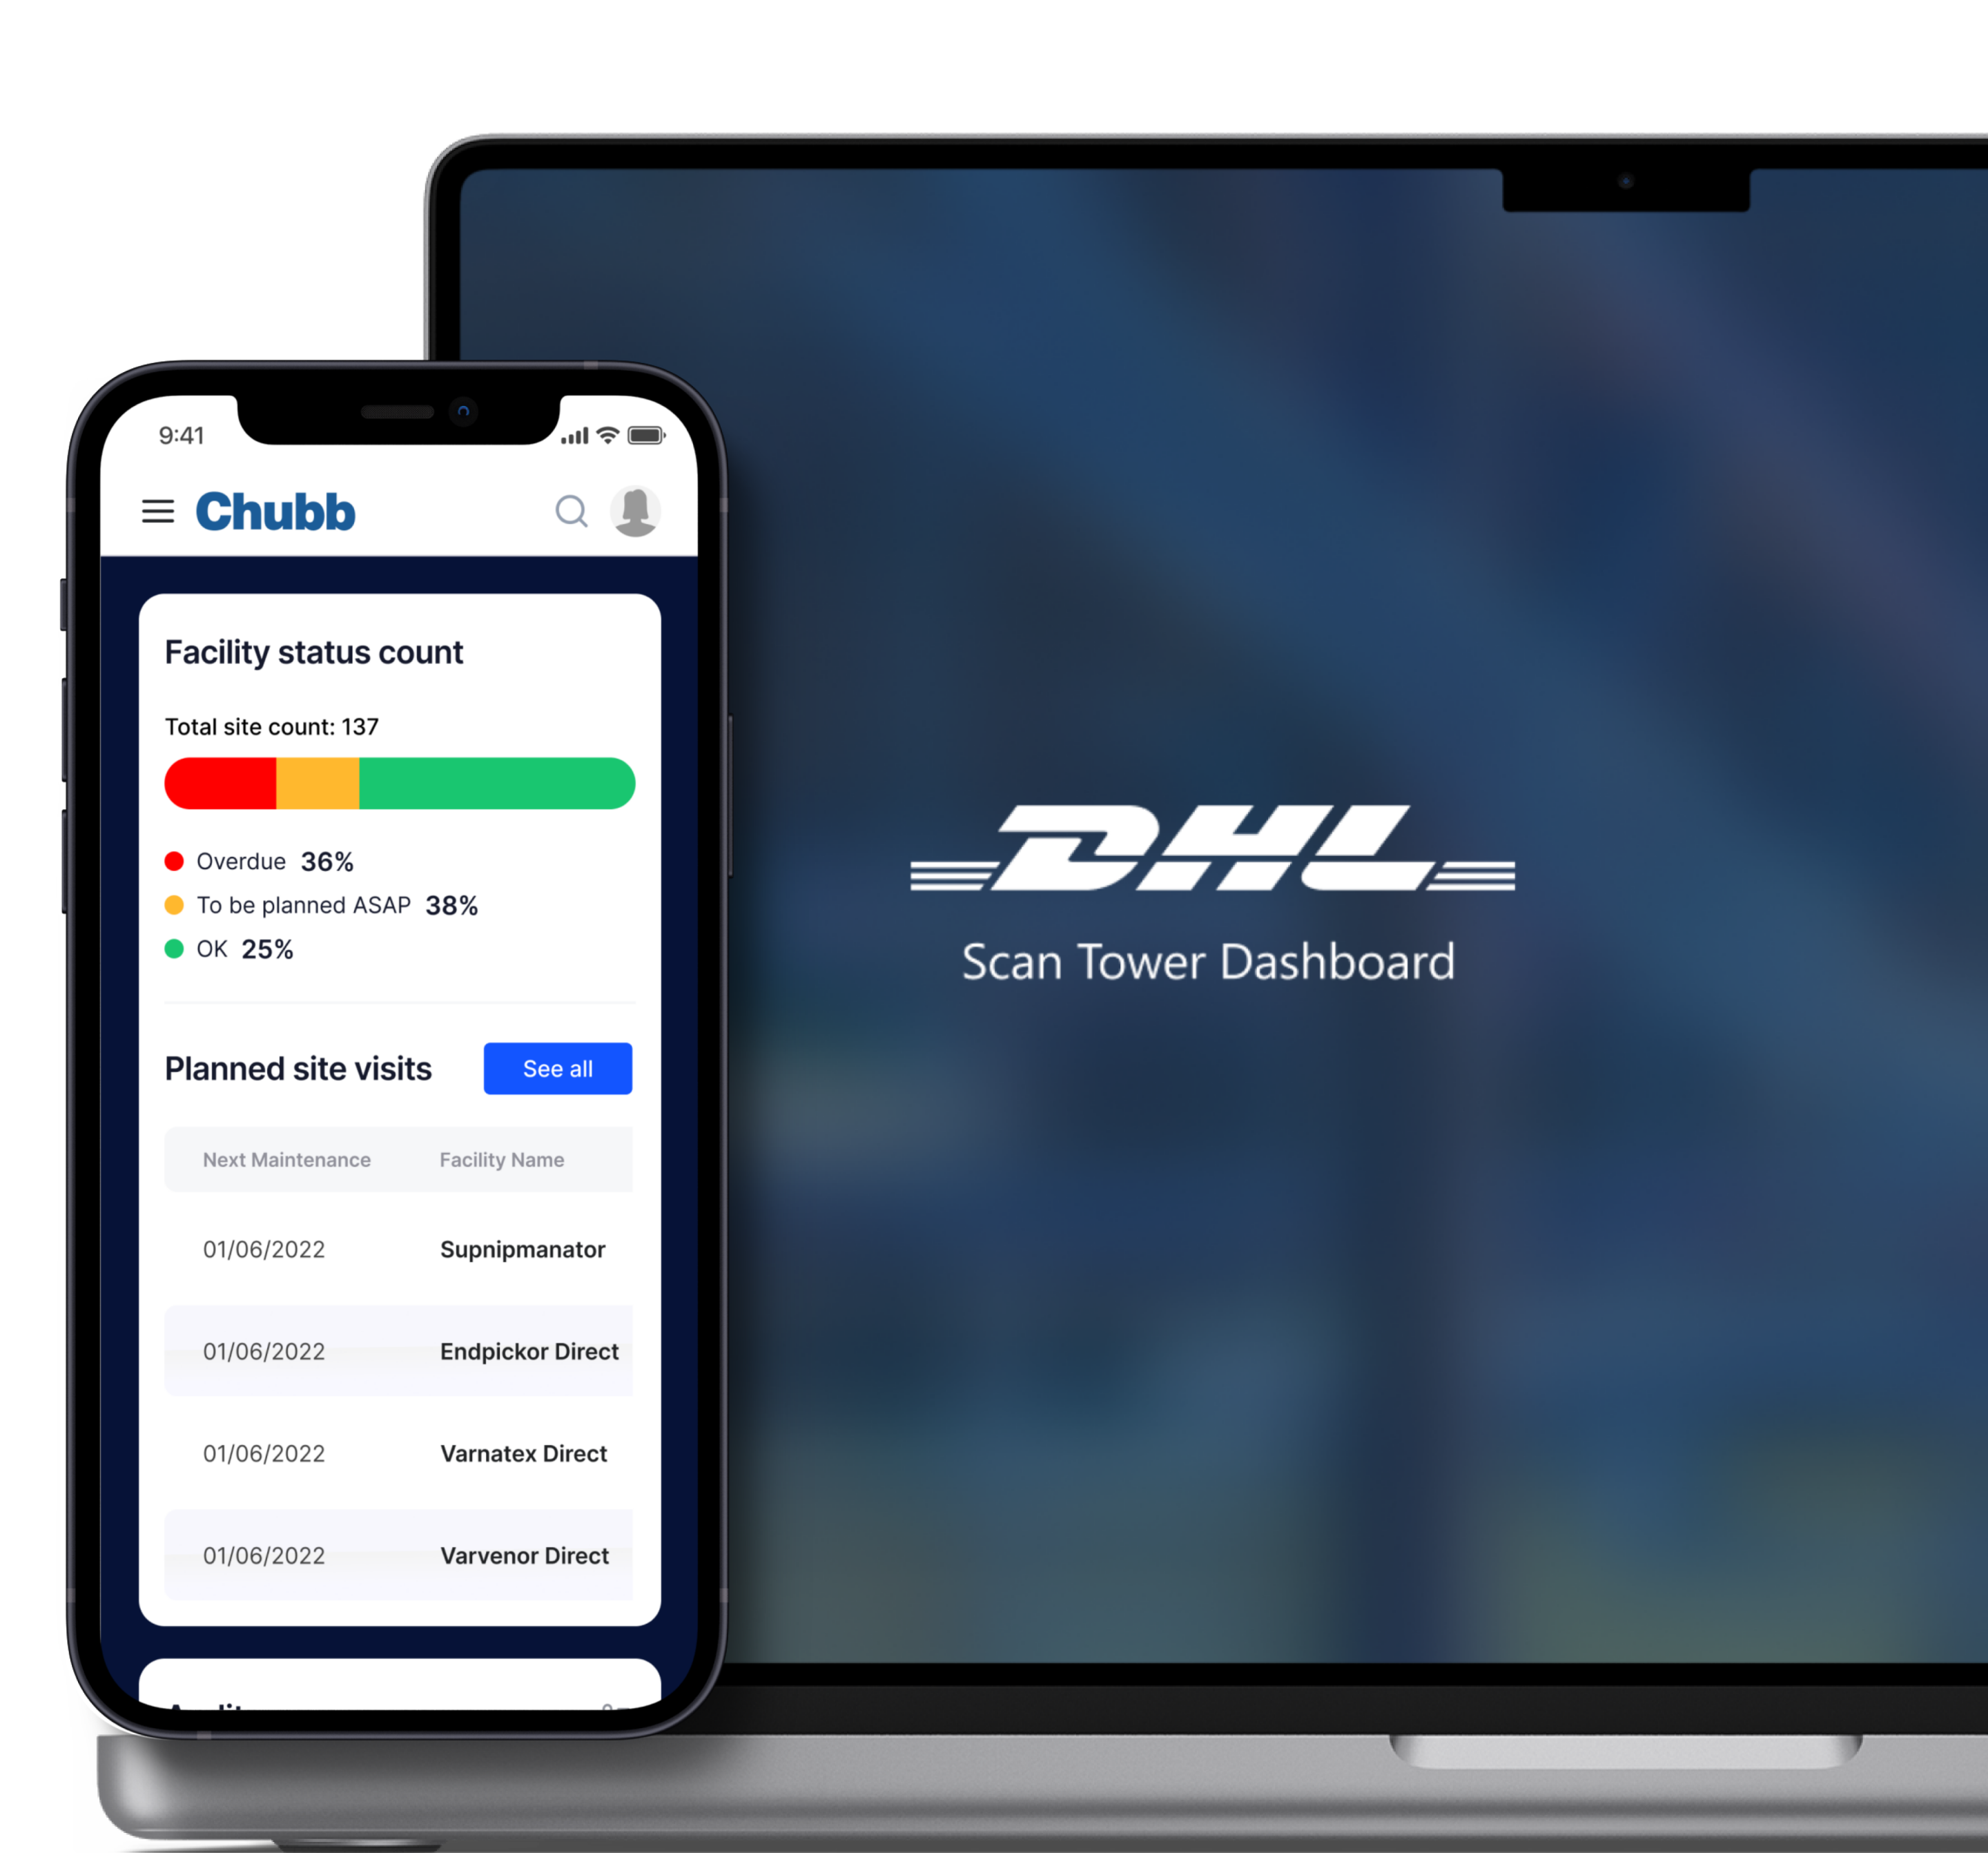 Mobile mockup and laptop mockup of Chubb Security mobile app and DHL dashboard app